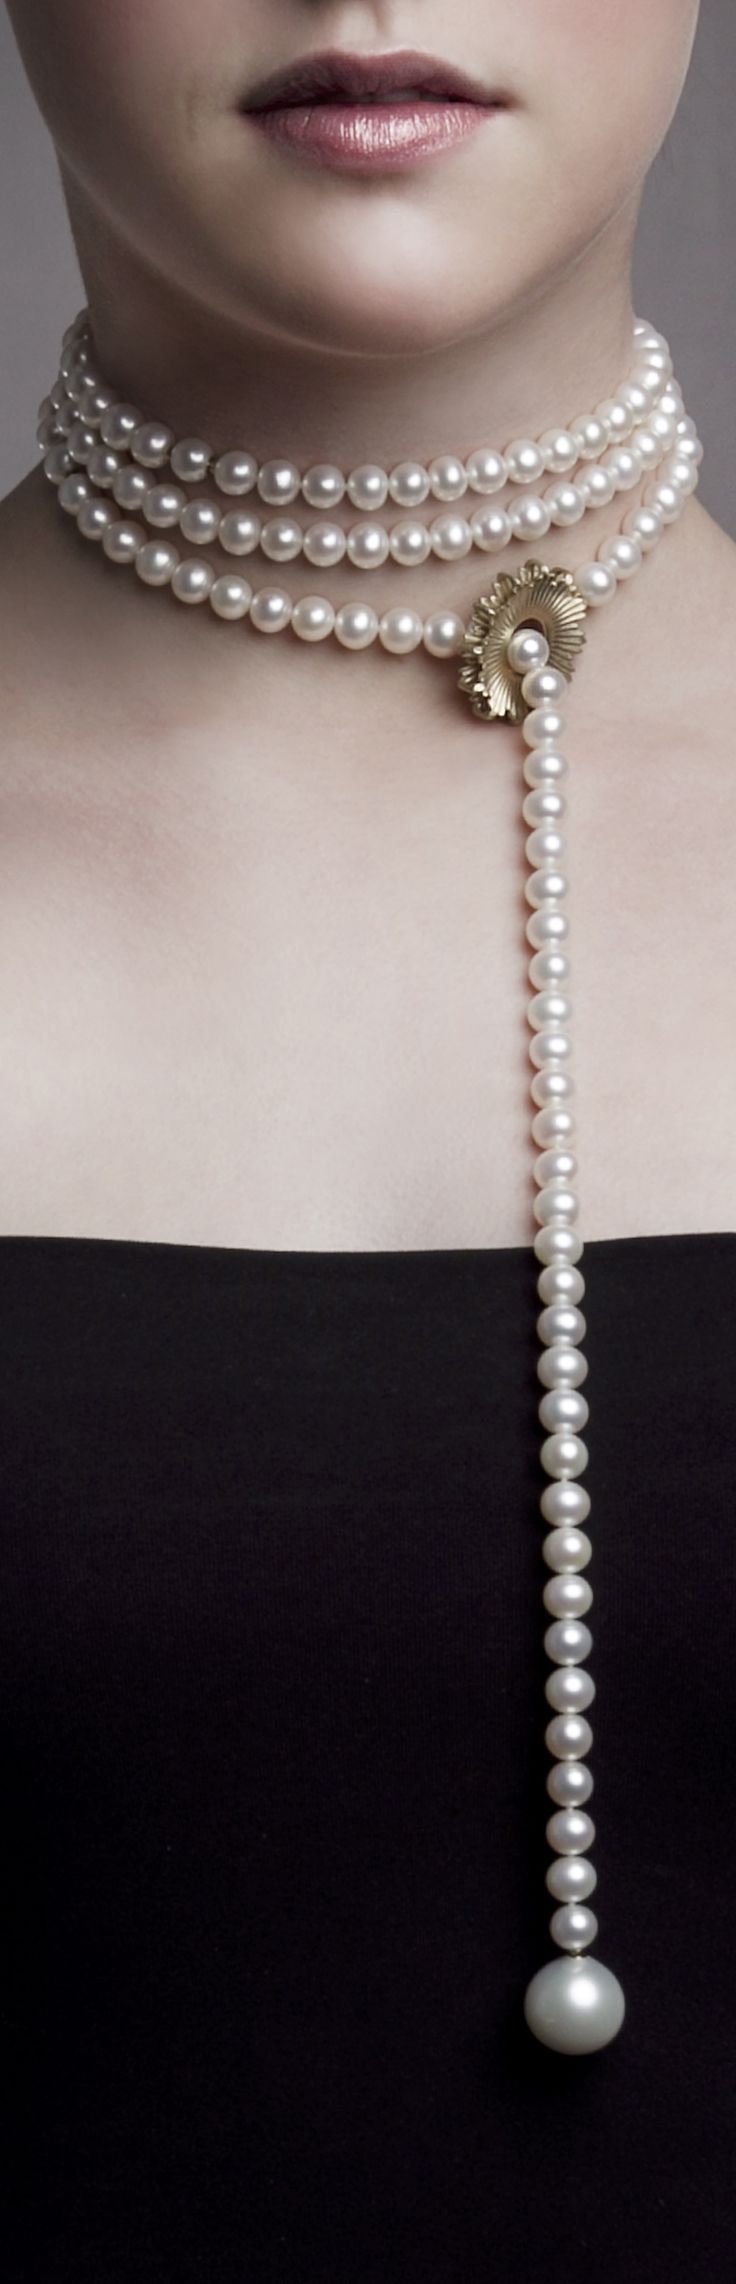 Necklace | Emquies-Holstein. &amp;quot;Mega Chic collection&amp;quot;. Freshwater cultured pearls with 14k gold